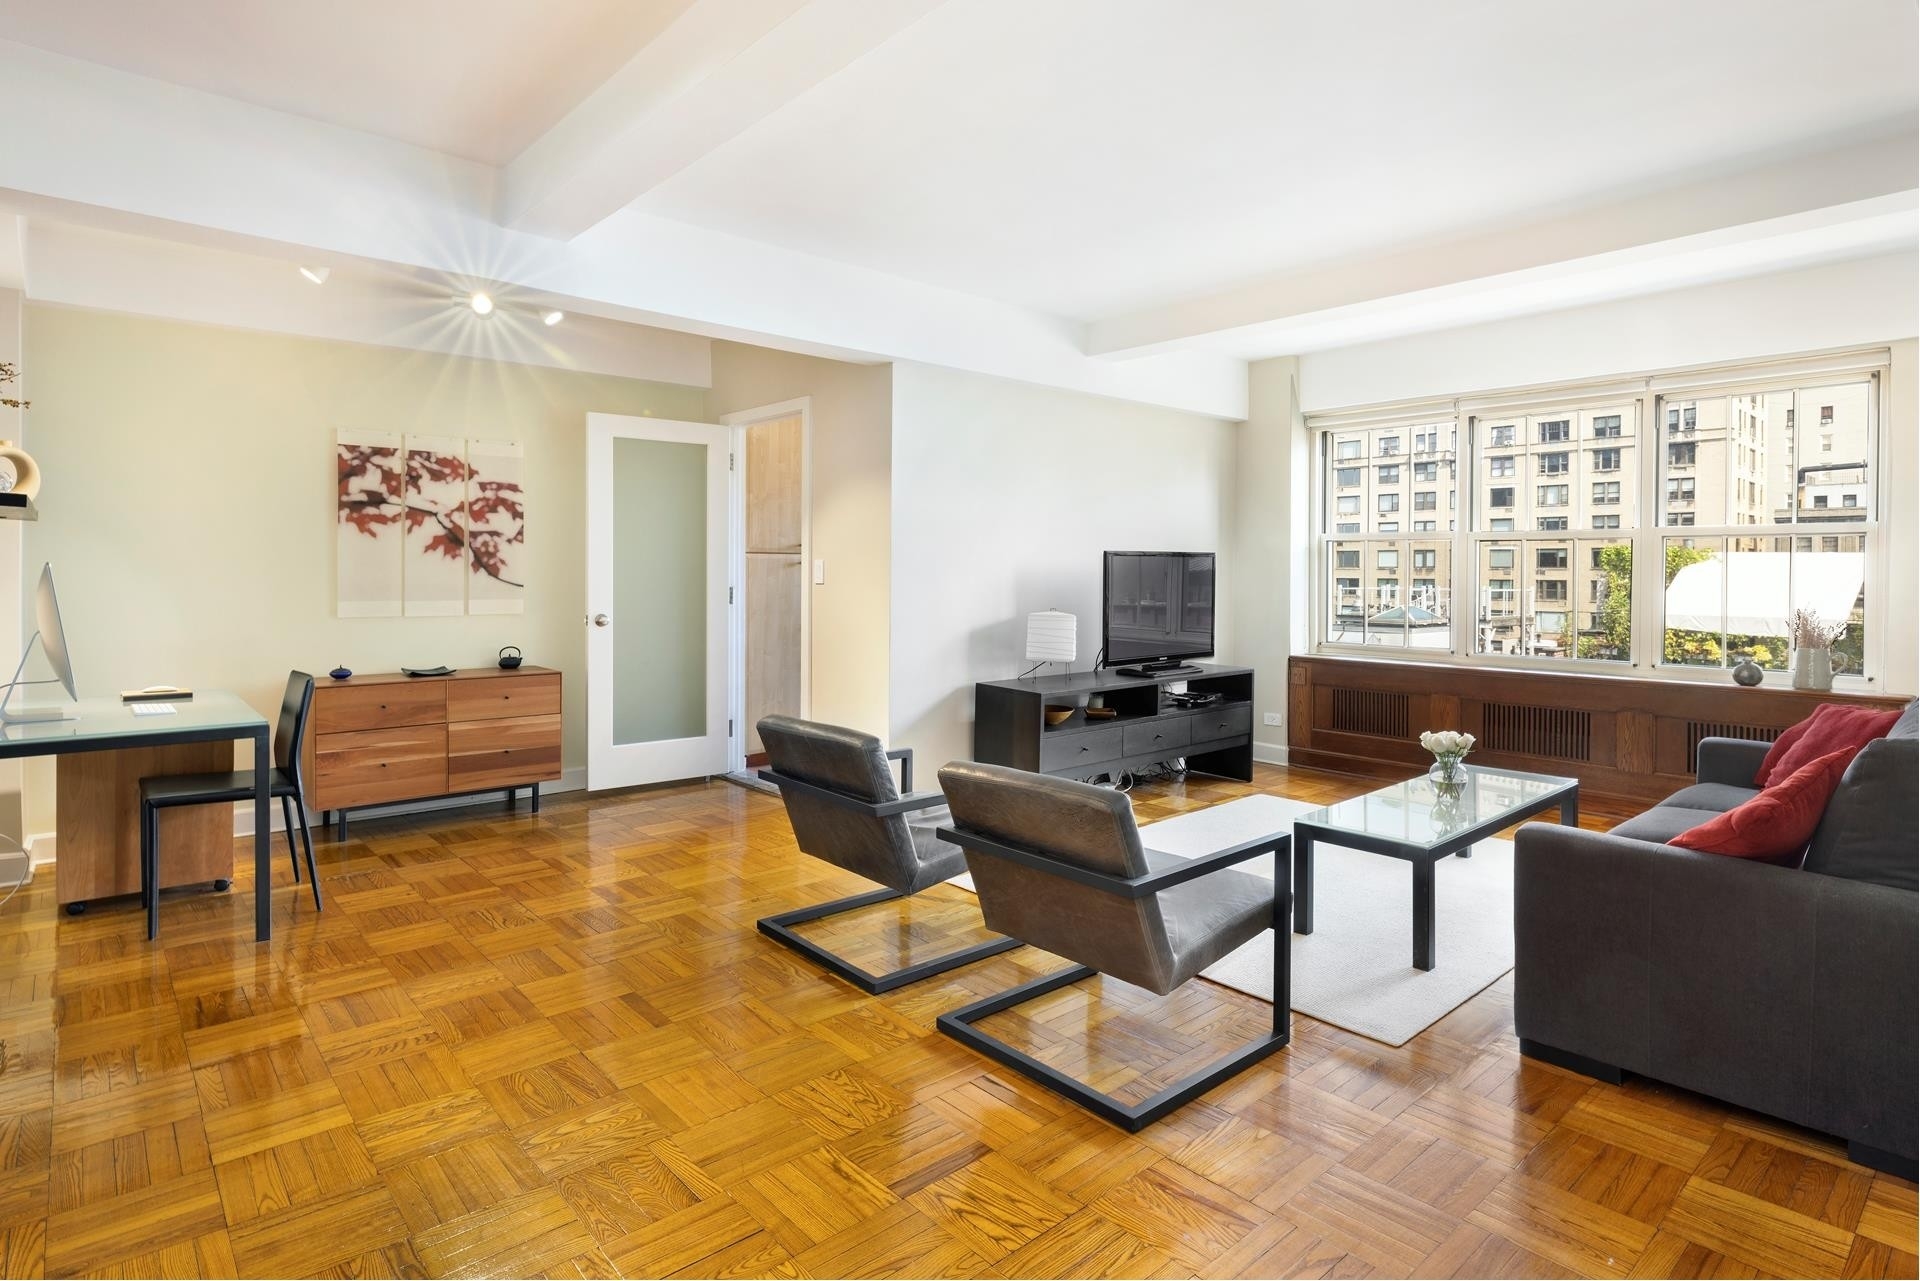 Co-op Properties for Sale at The Elliot, 320 W 76TH ST, 8EE Upper West Side, New York, New York 10023